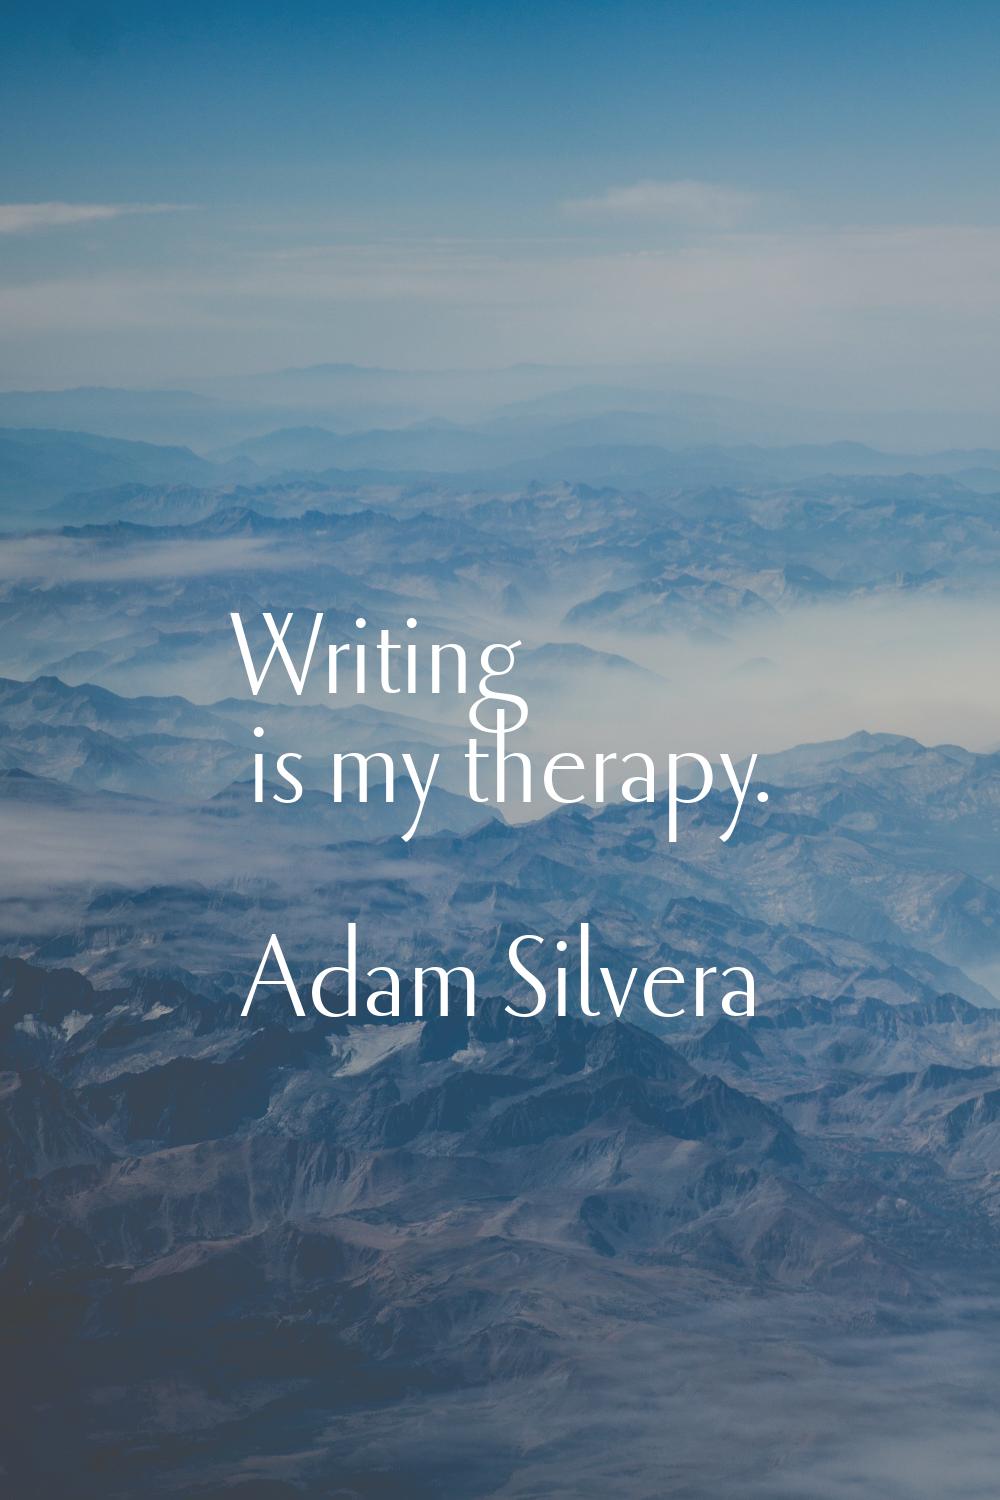 Writing is my therapy.